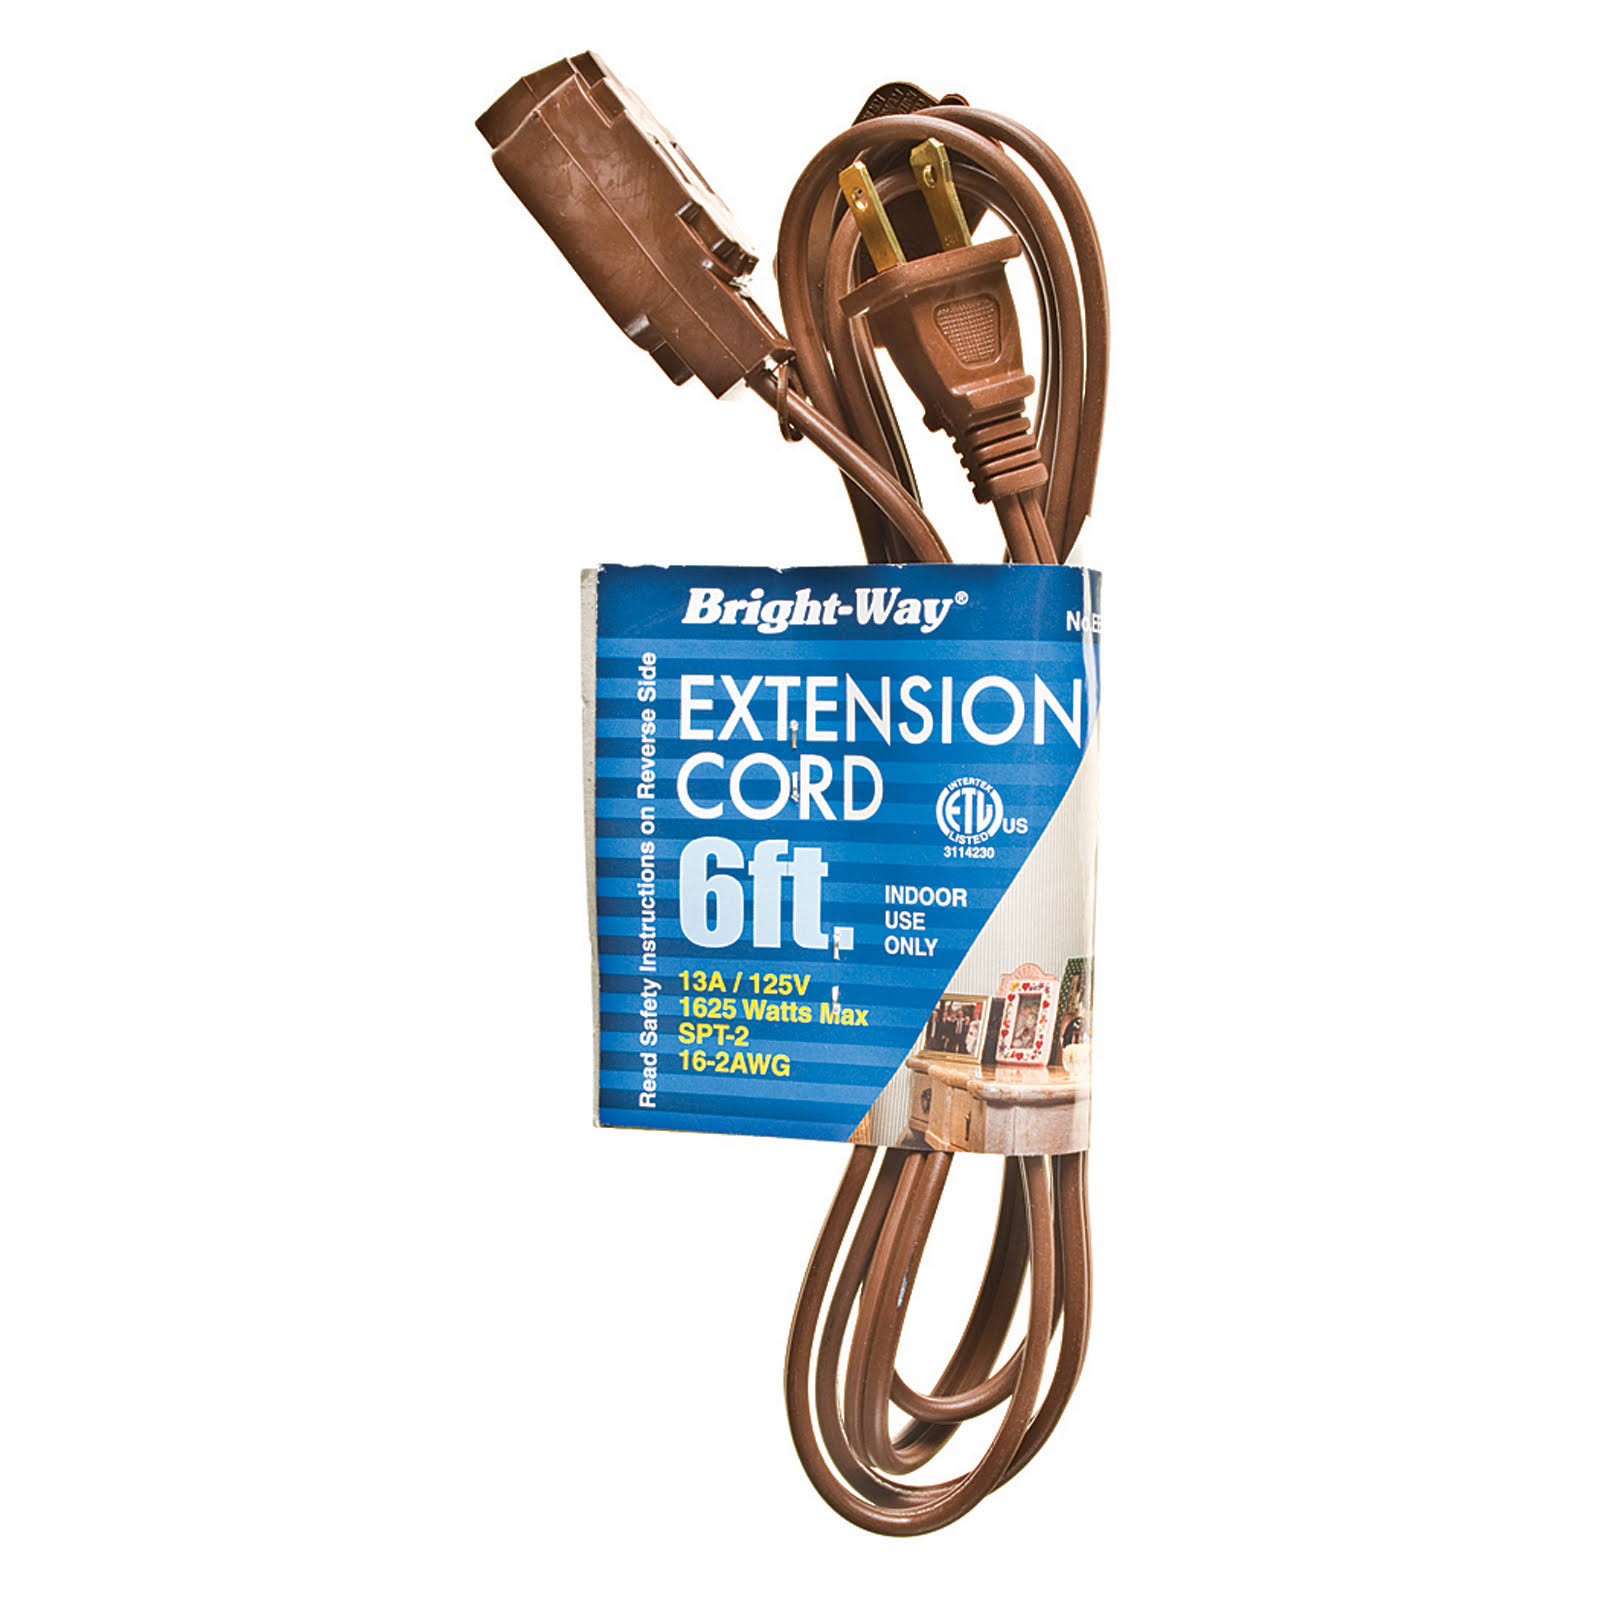 Bright Way Household Extension Cord - 6', Brown